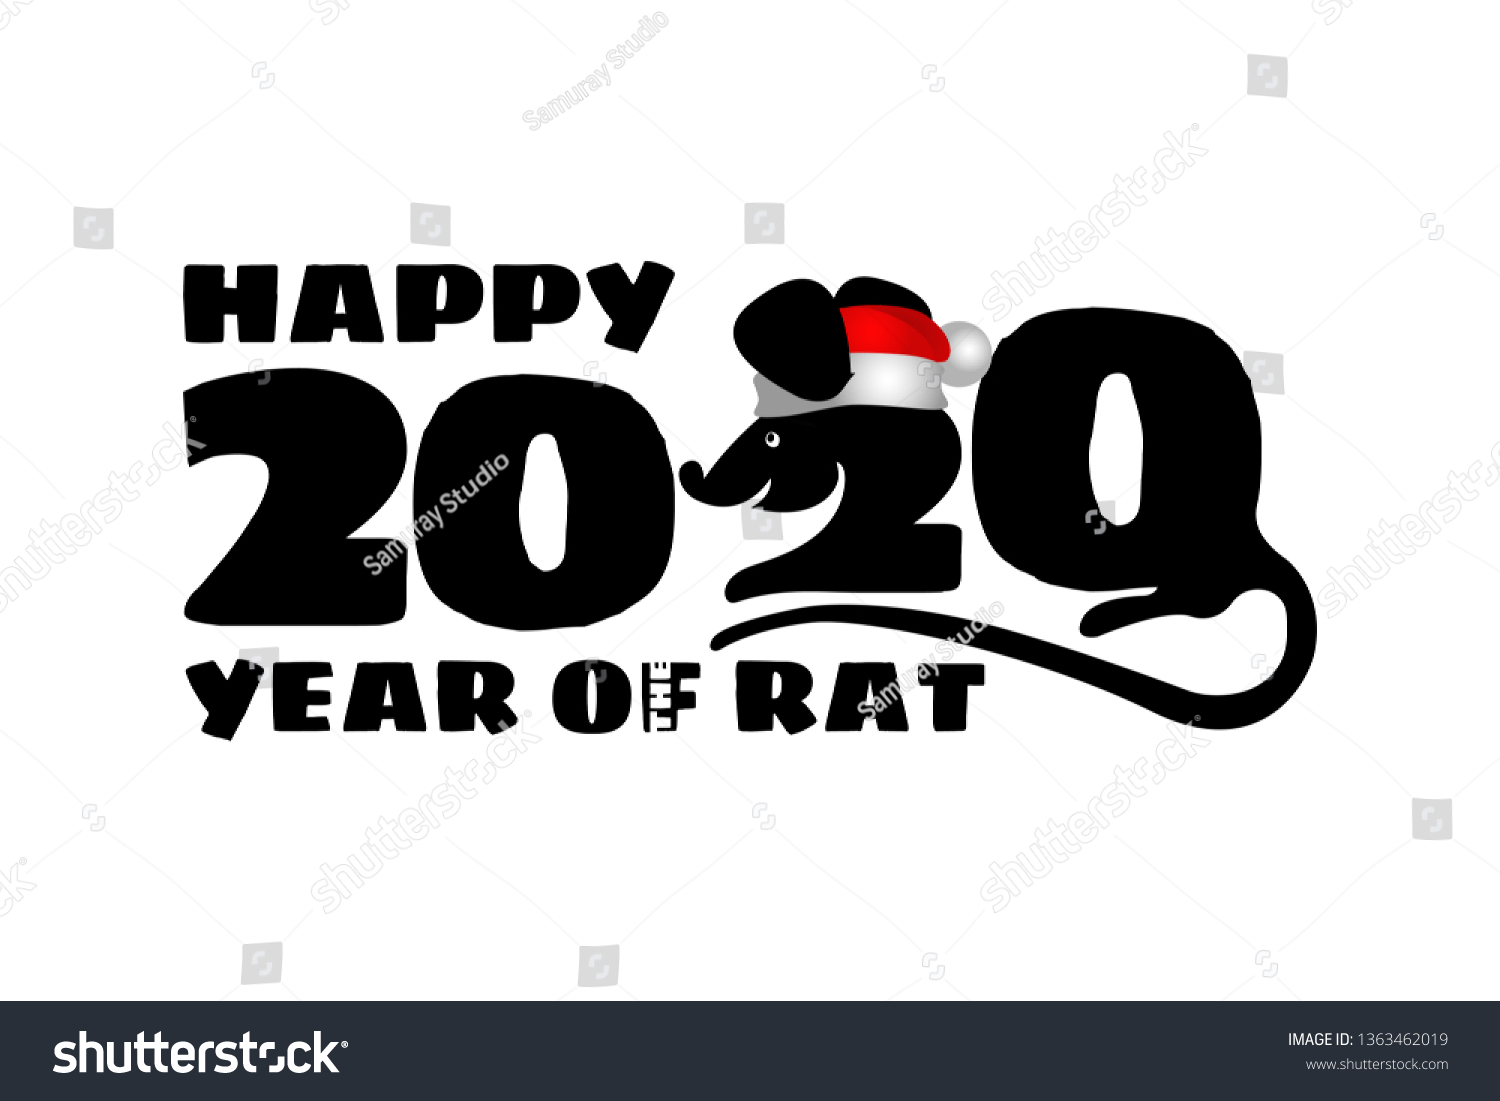 2020 Chinese New Year Rat Calendar Stock Image | Download Now